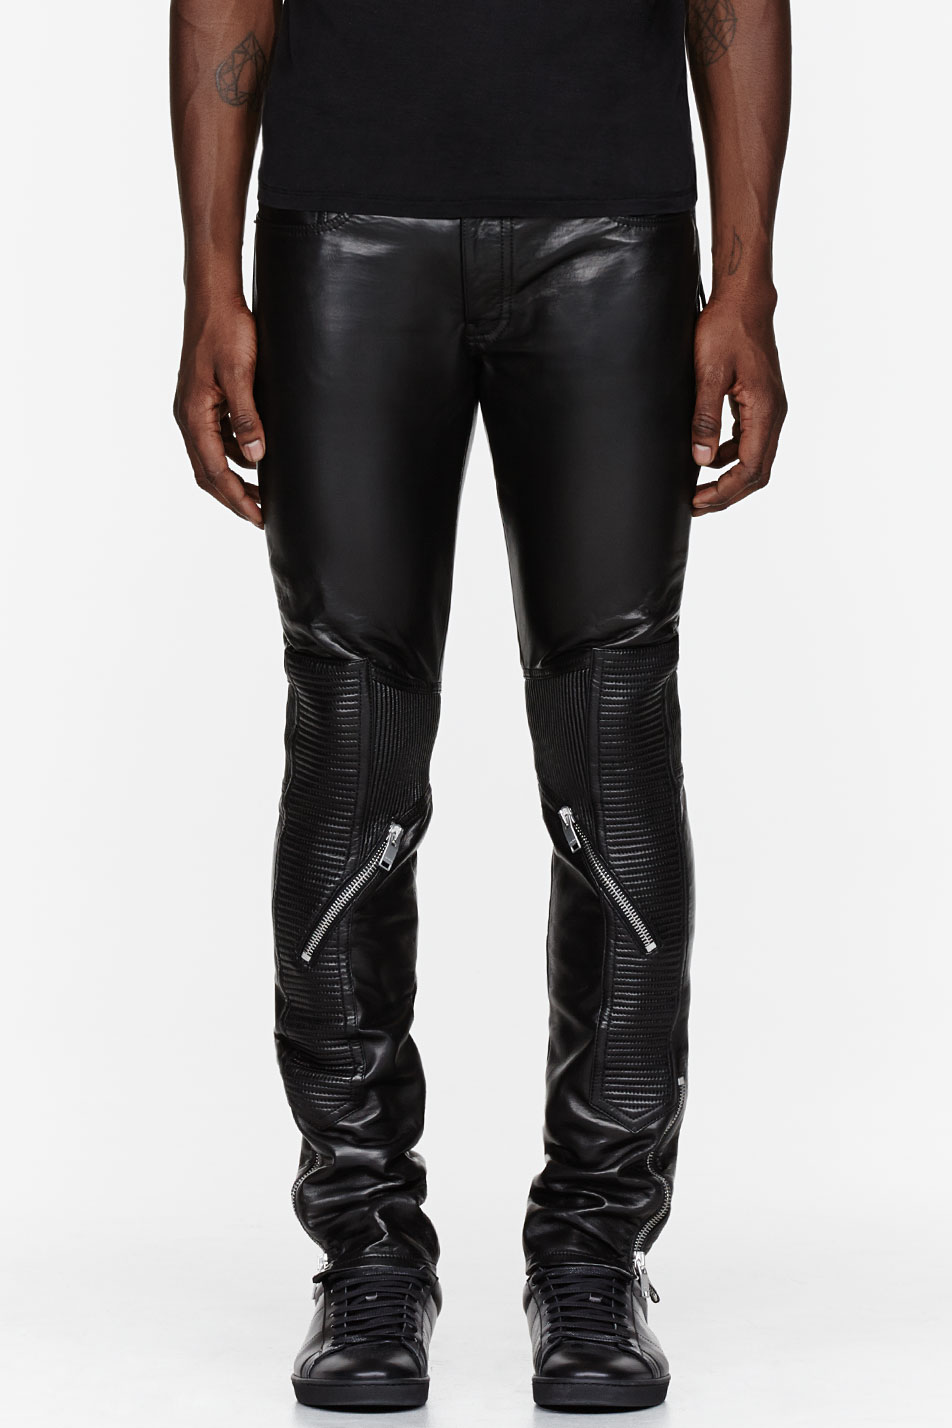 Lyst - Saint Laurent Black Leather Ribbed and Zippered Biker Pants in ...